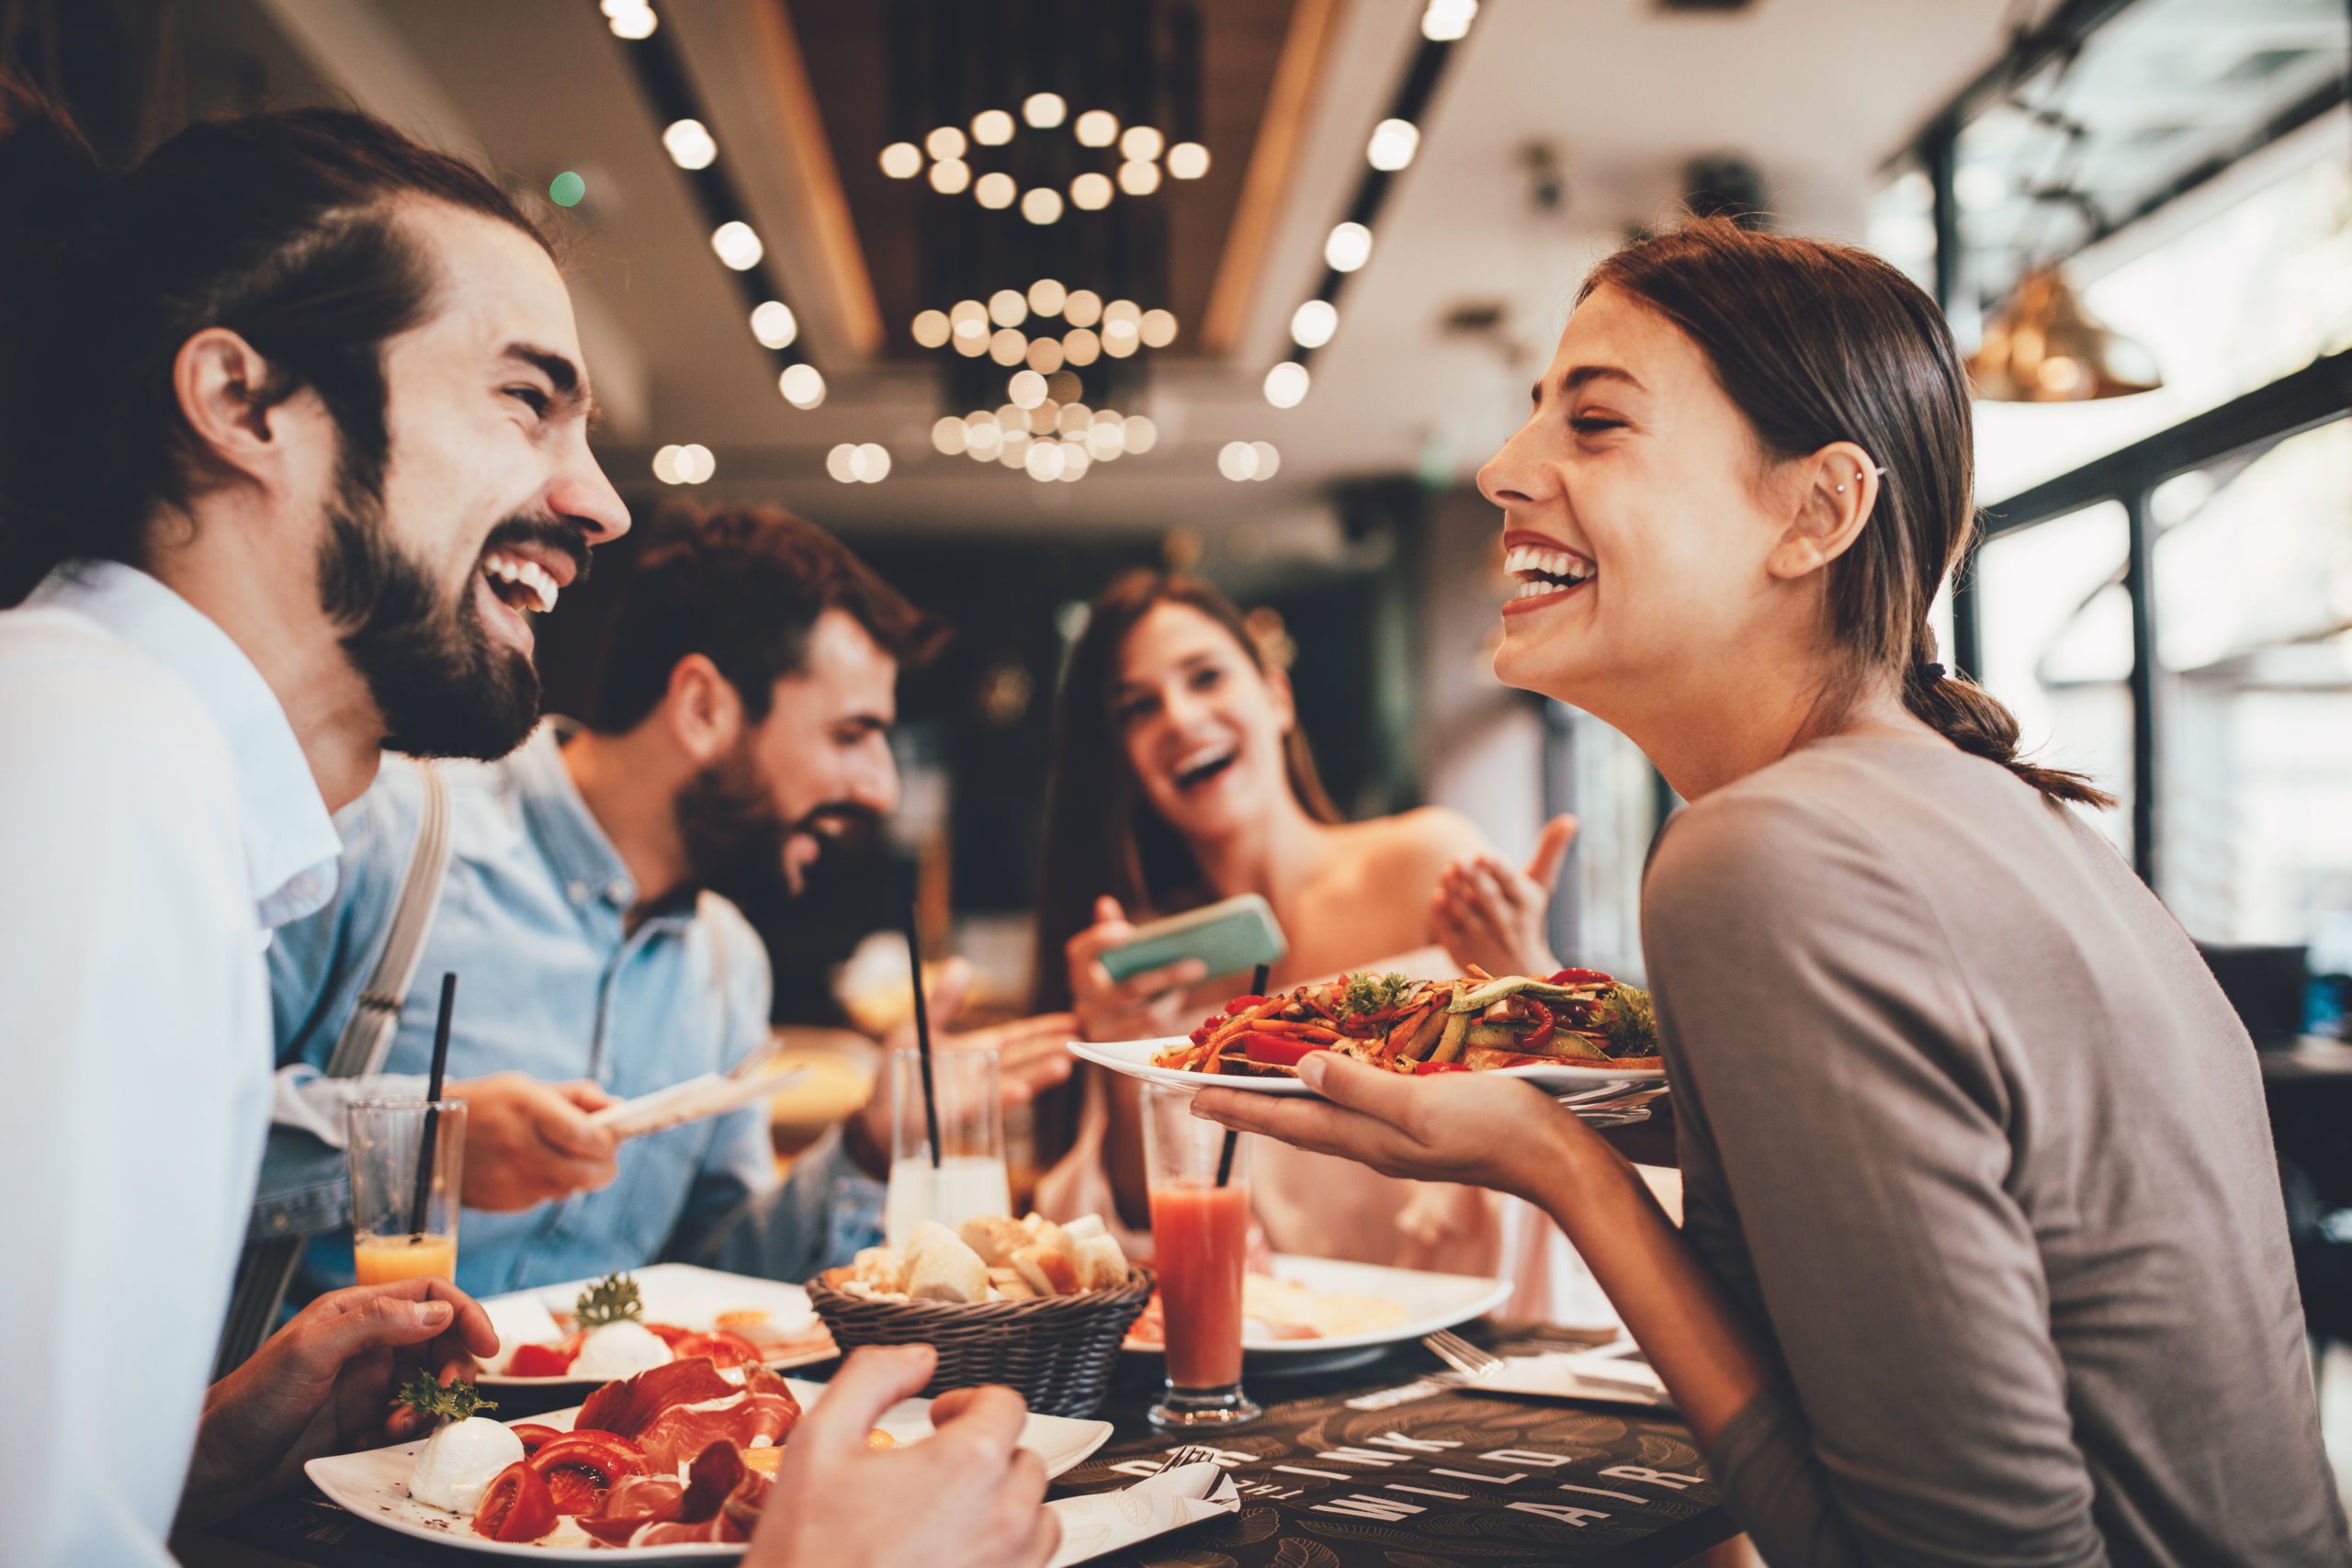 How to build restaurant loyalty